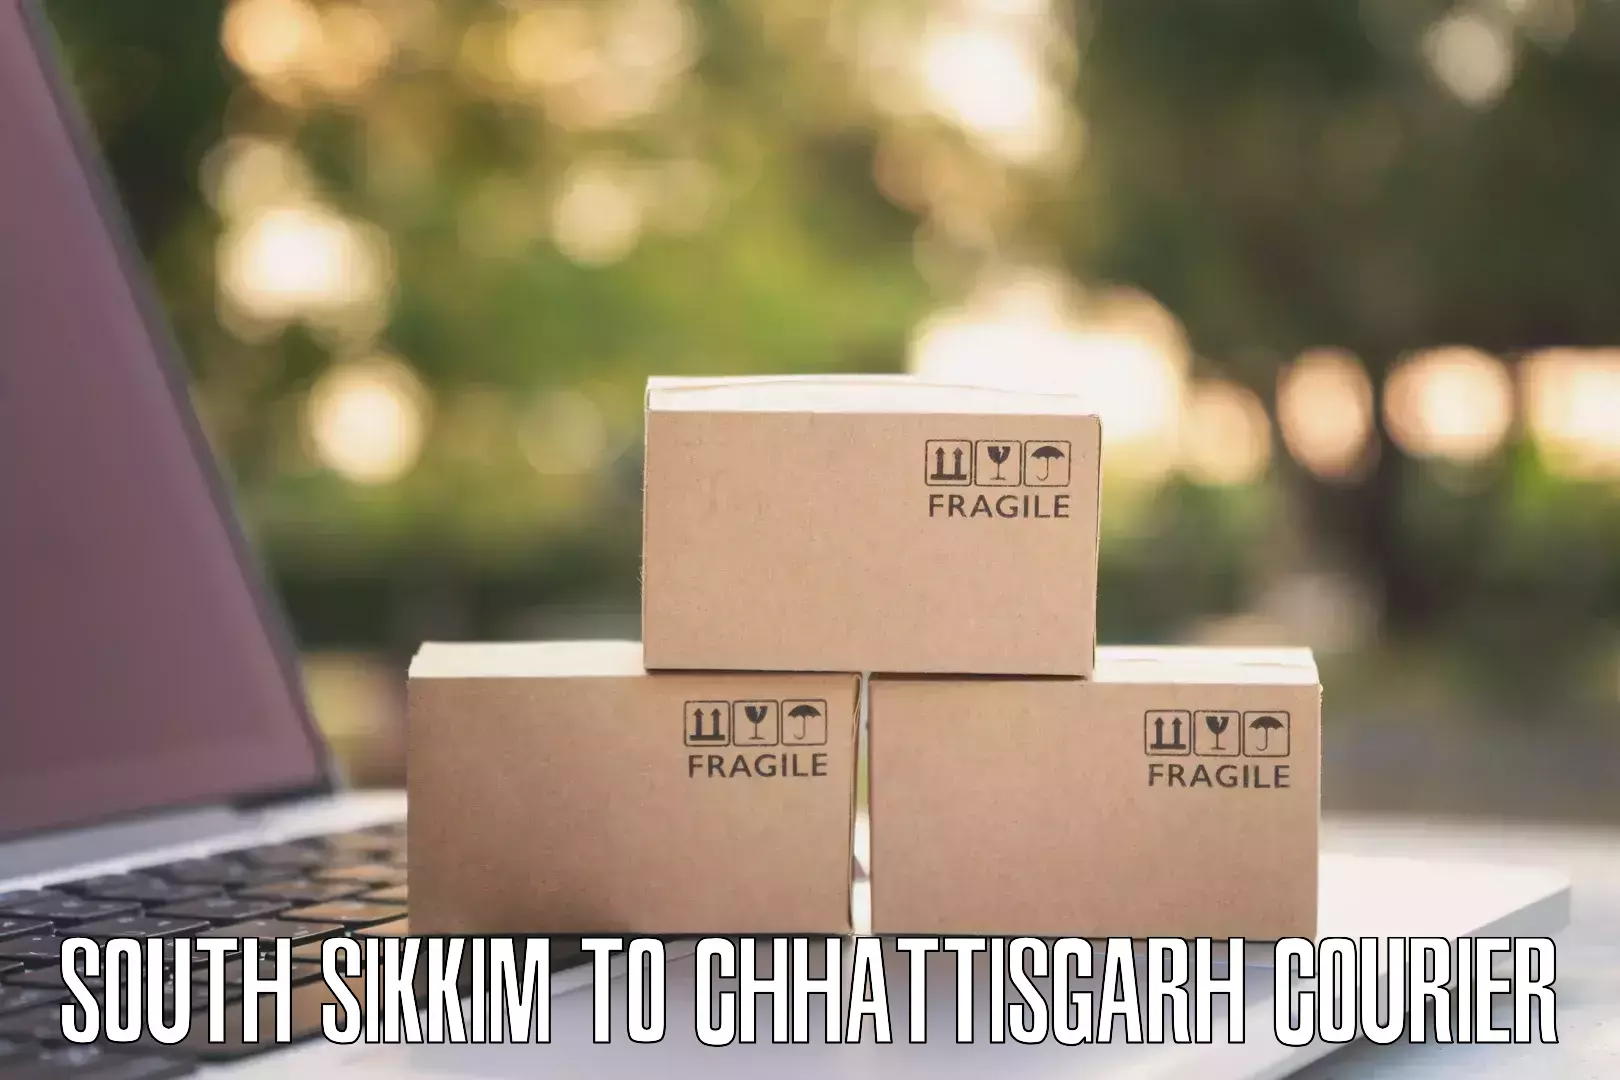 Courier service booking South Sikkim to Chhattisgarh